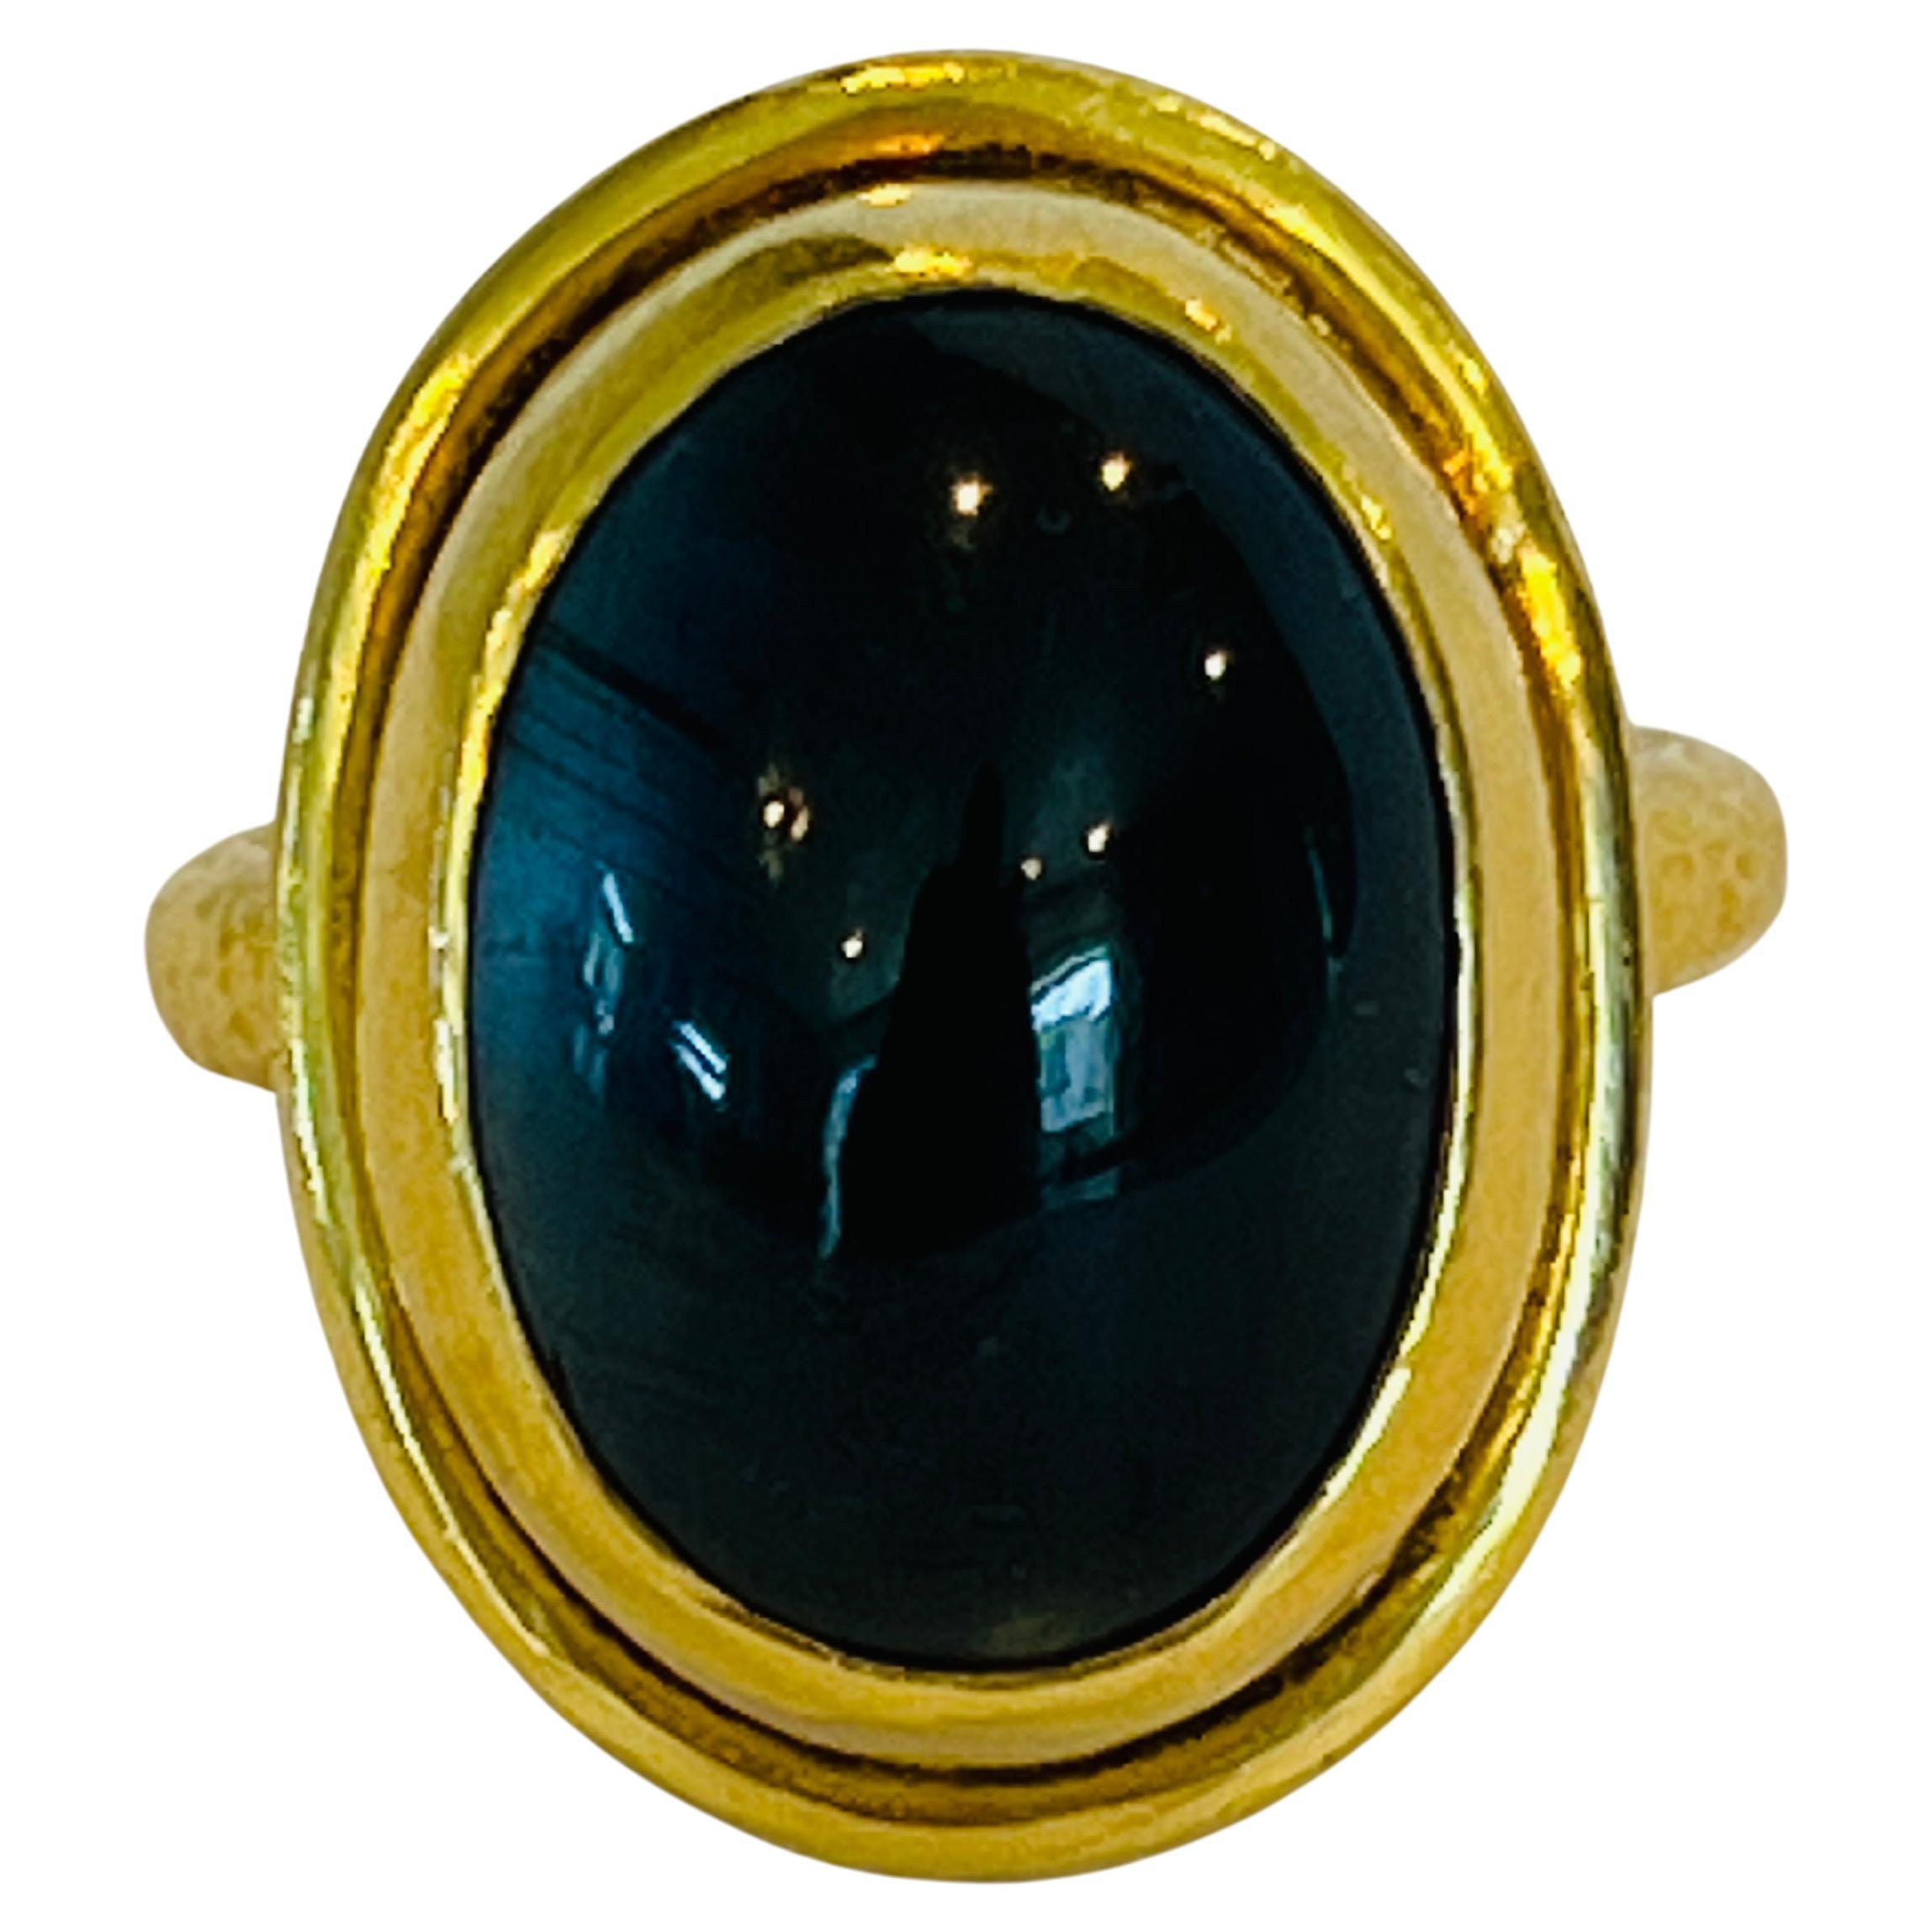 Stunning Tourmaline Cocktail Ring, is set in a 22k gold Roman setting. Bringing an ancient feel with a modern twist. Hand made, one of a kind stunner. 

The Tagili Promise: With every Ring sold, a portion of the proceeds goes to a local womans